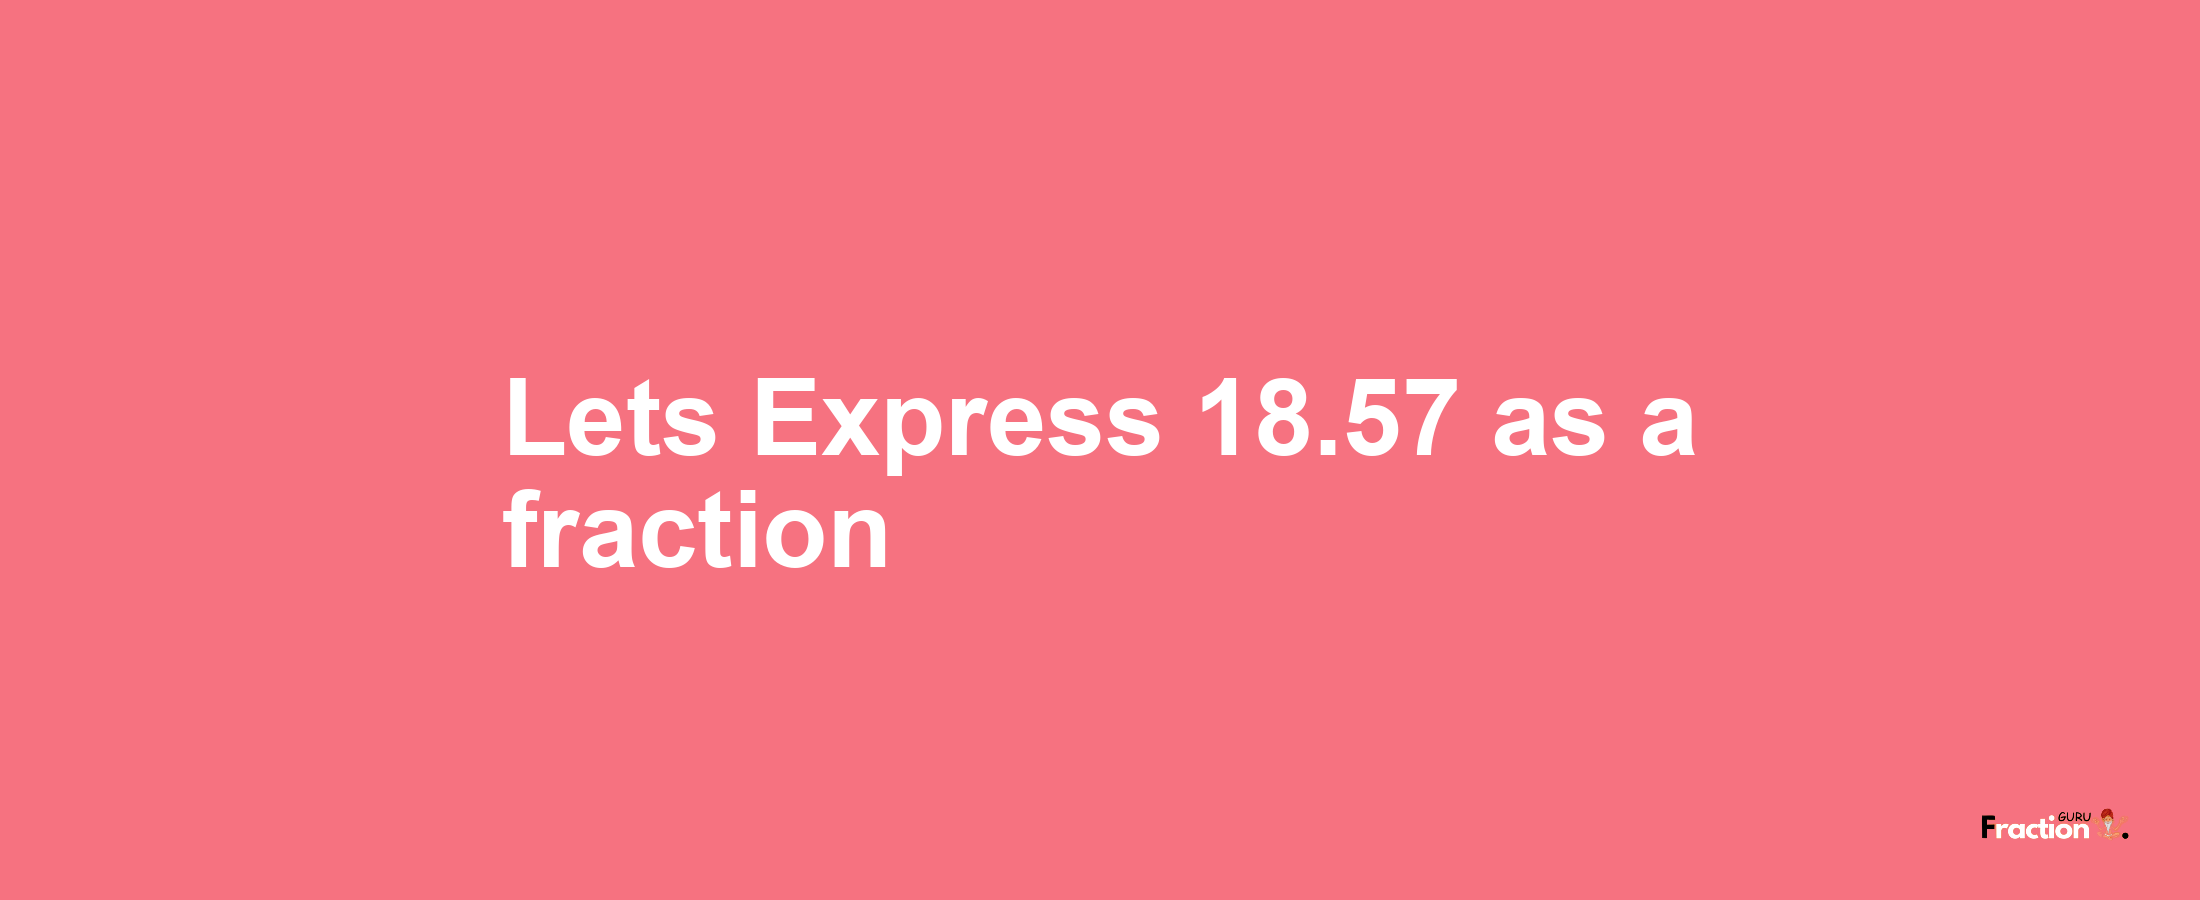 Lets Express 18.57 as afraction